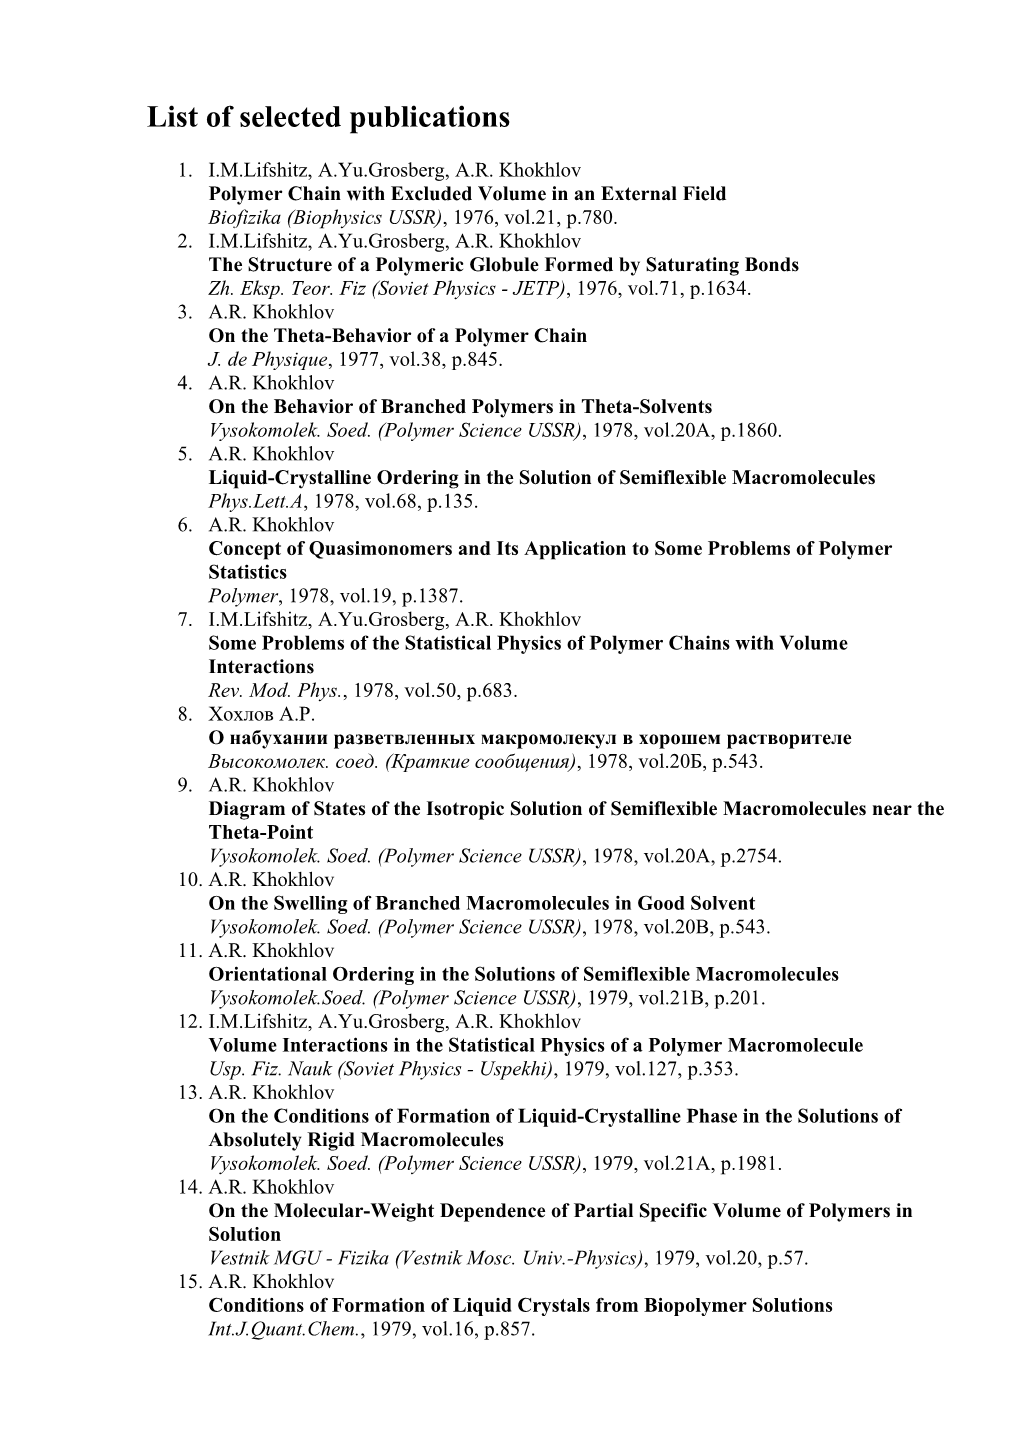 List of Selected Publications